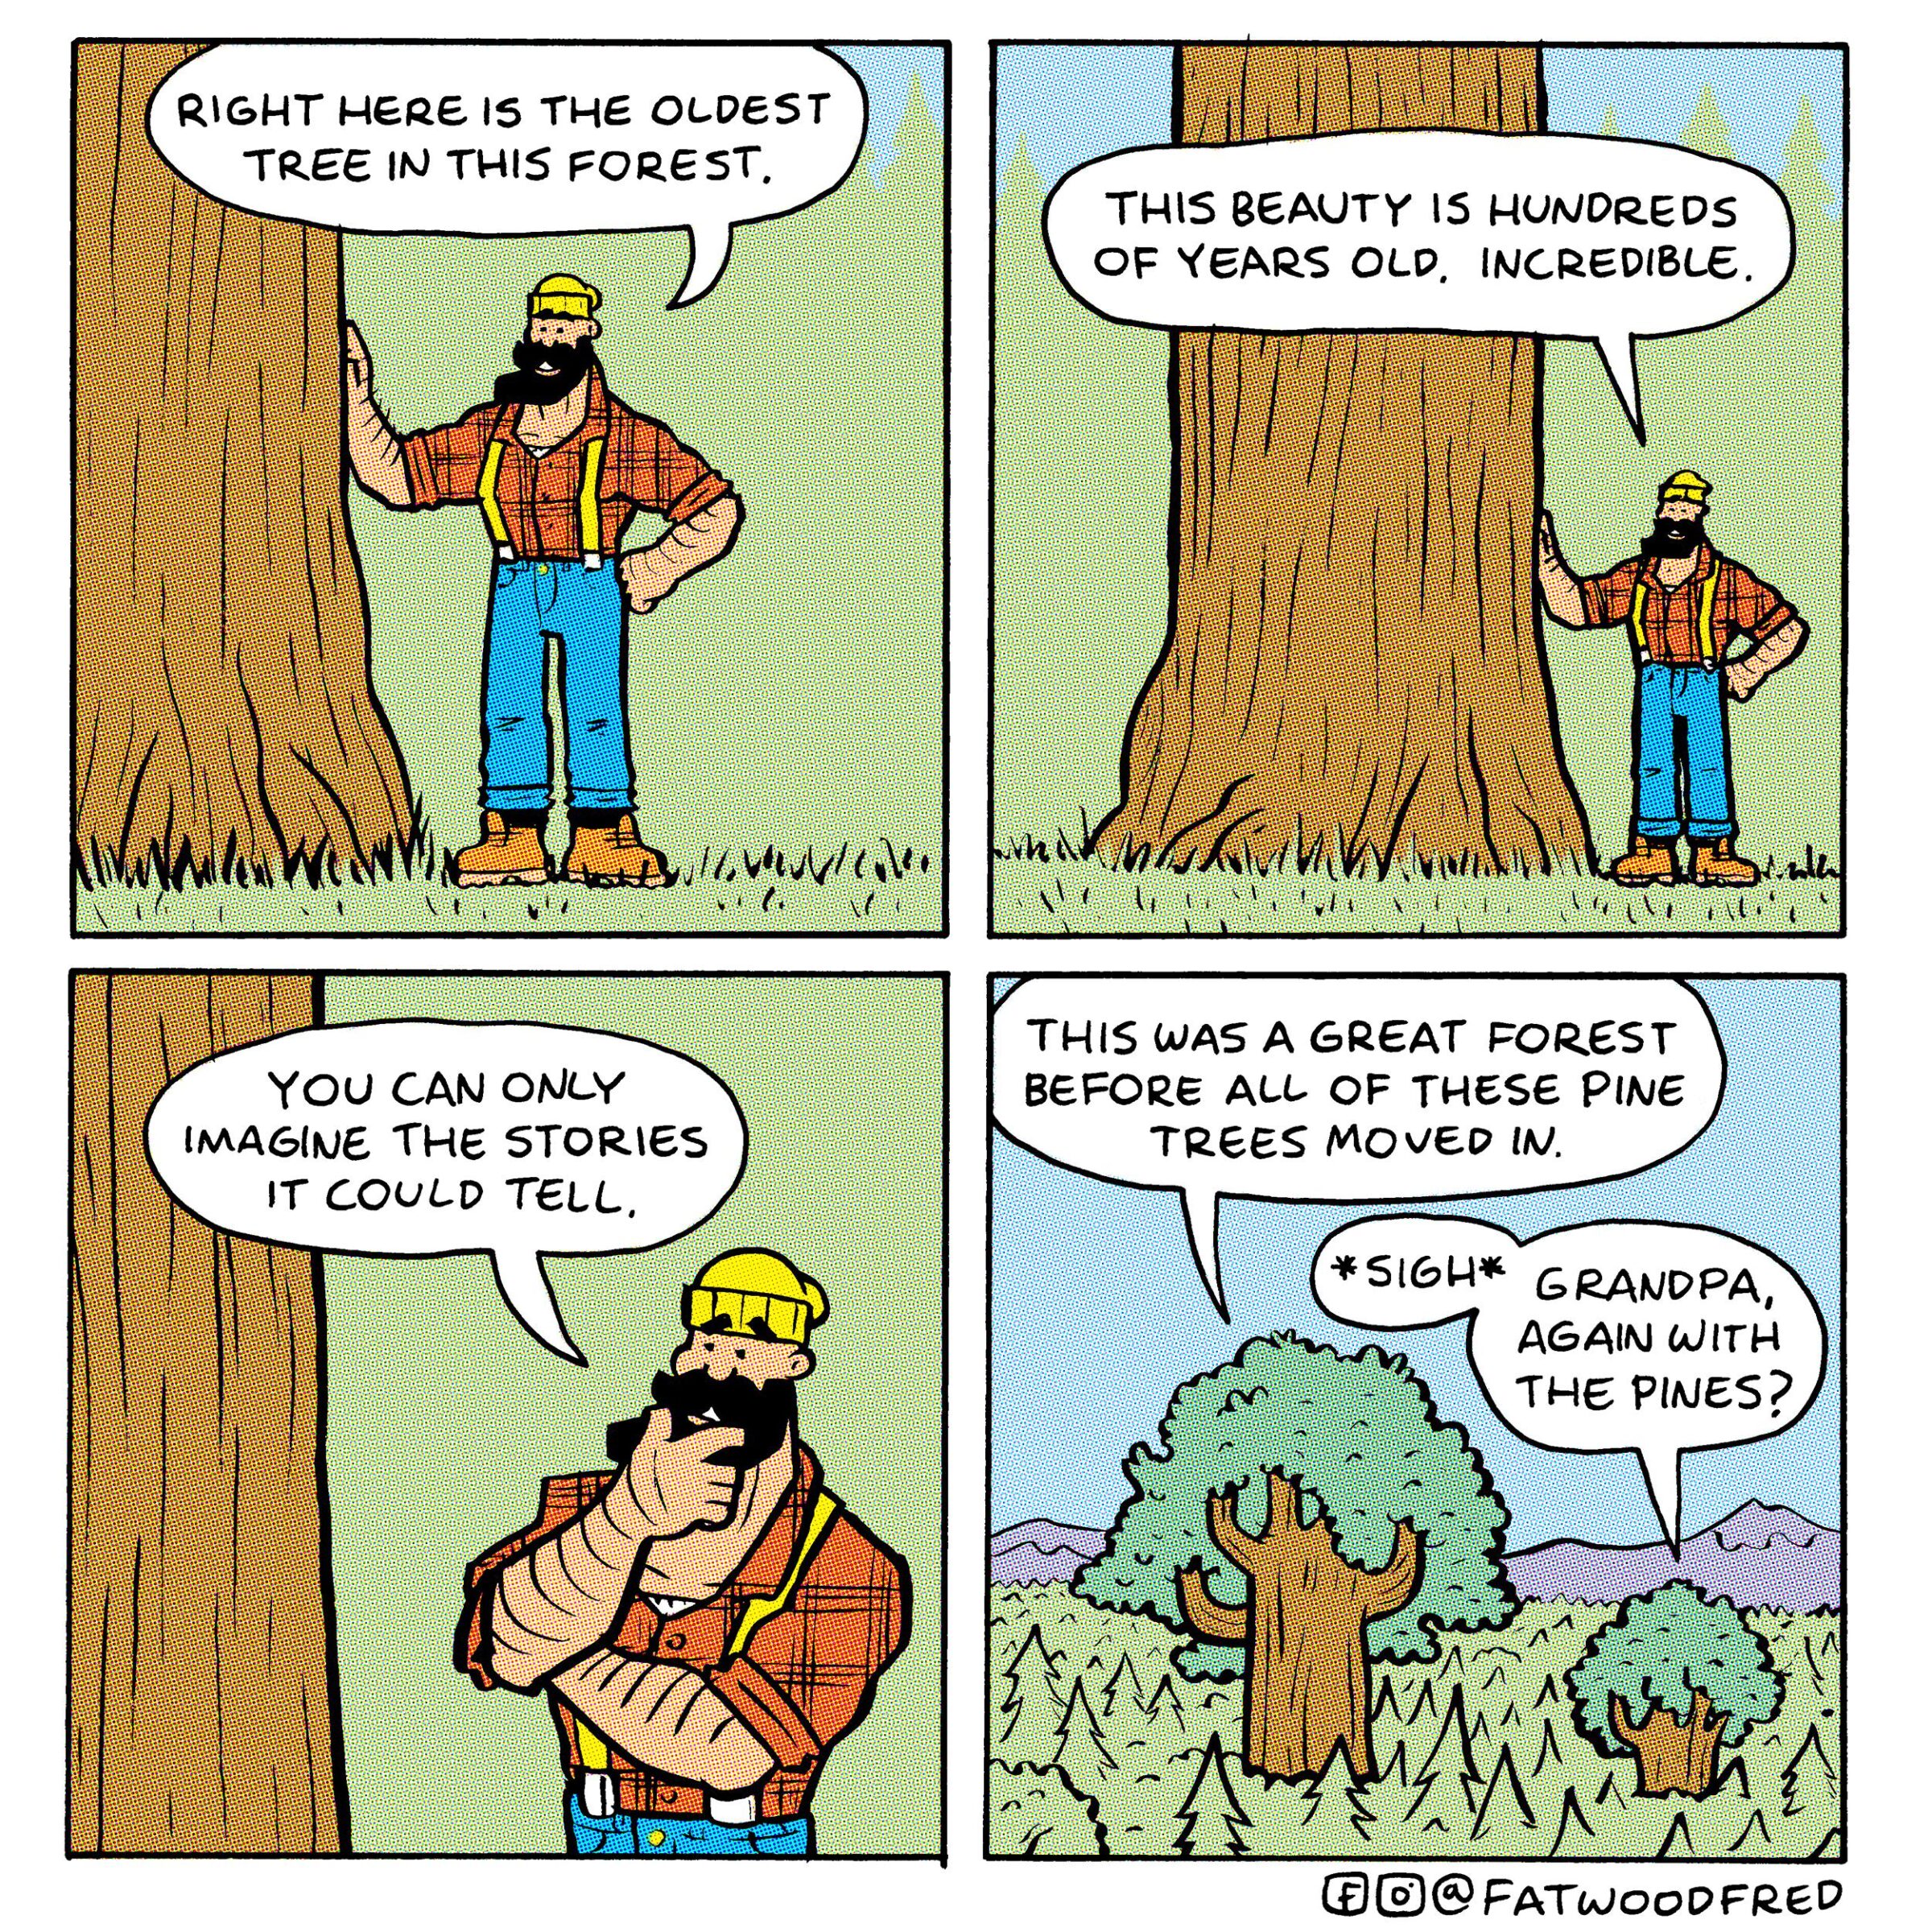 The oldest tree,  Comics The oldest tree,  text: RIGHT Hec IS THE OLDEST TREE IN THIS FOREST. You CAN ONLY IMA6(VE THE IT COULD ST0Rles TELL, THIS IS HUNDZEDS OF OLD. INCREDIBLE. THIS WAS A GREAT FOREST BEFORE ACC OF THESE PINE -rzees movep w. GRANDPA, THE PINES? 